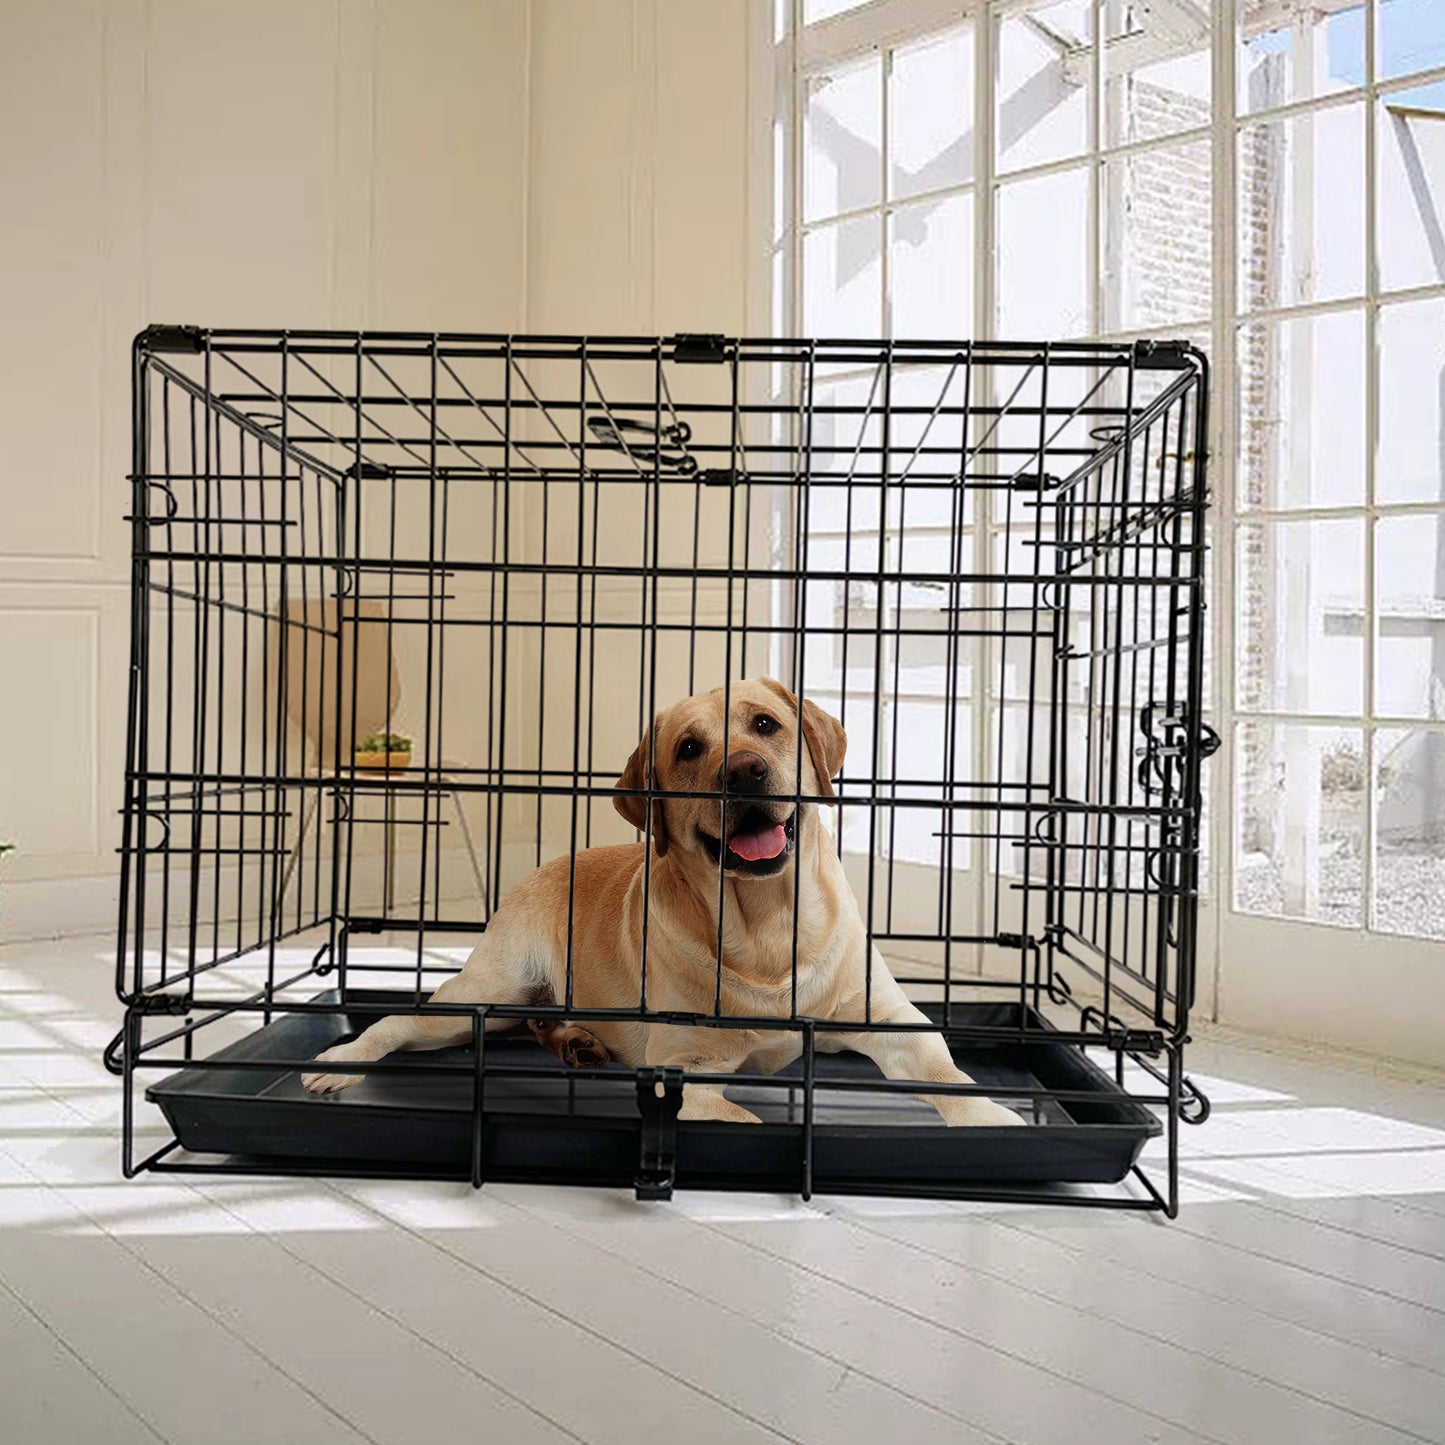 42 Pet Dog Cage Kennel Metal Crate Enlarged Thickened Reinforced Pet Dog House"